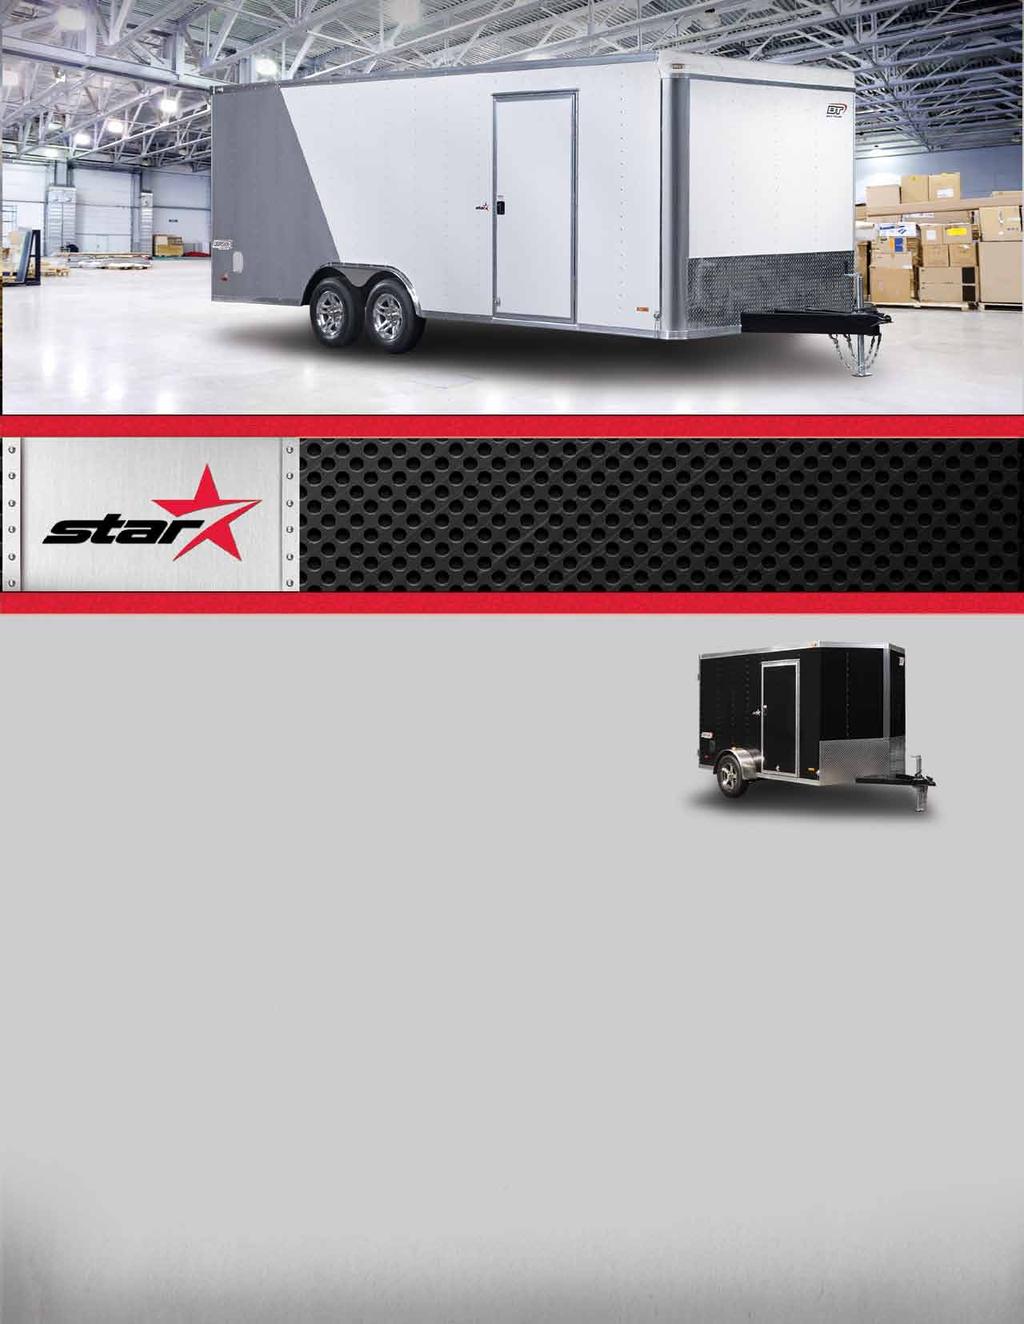 8.5 x 20 star TRAILERS BY BRAVO Are great looking, premium commercial-quality